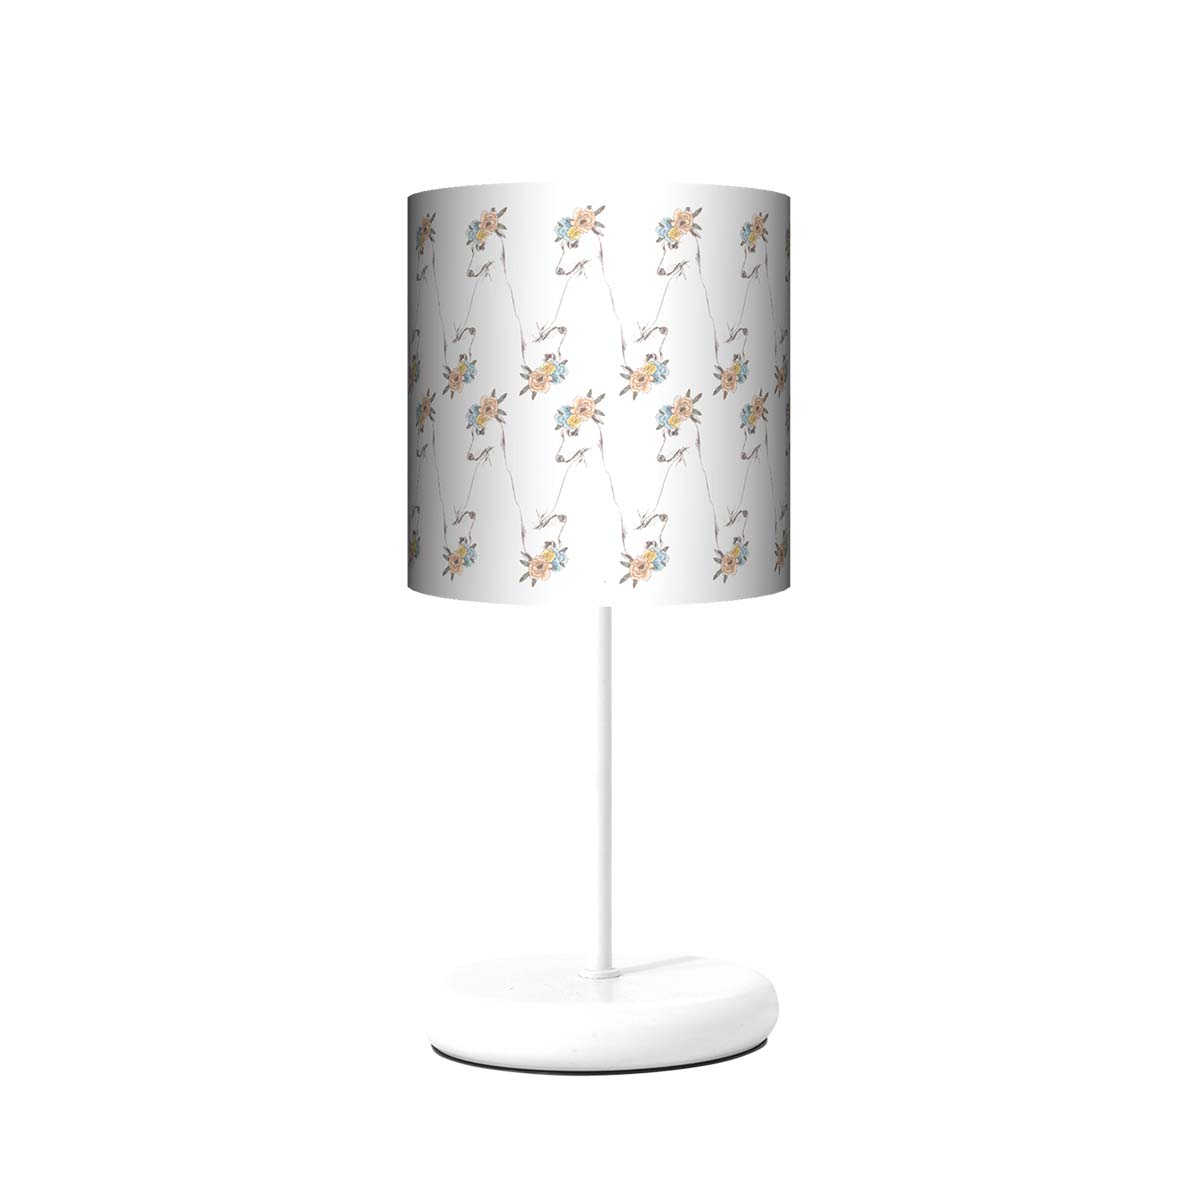 Desk lamp with sighthounds WHITE SIGHTHOUND - Wear.Chartbeat image 1